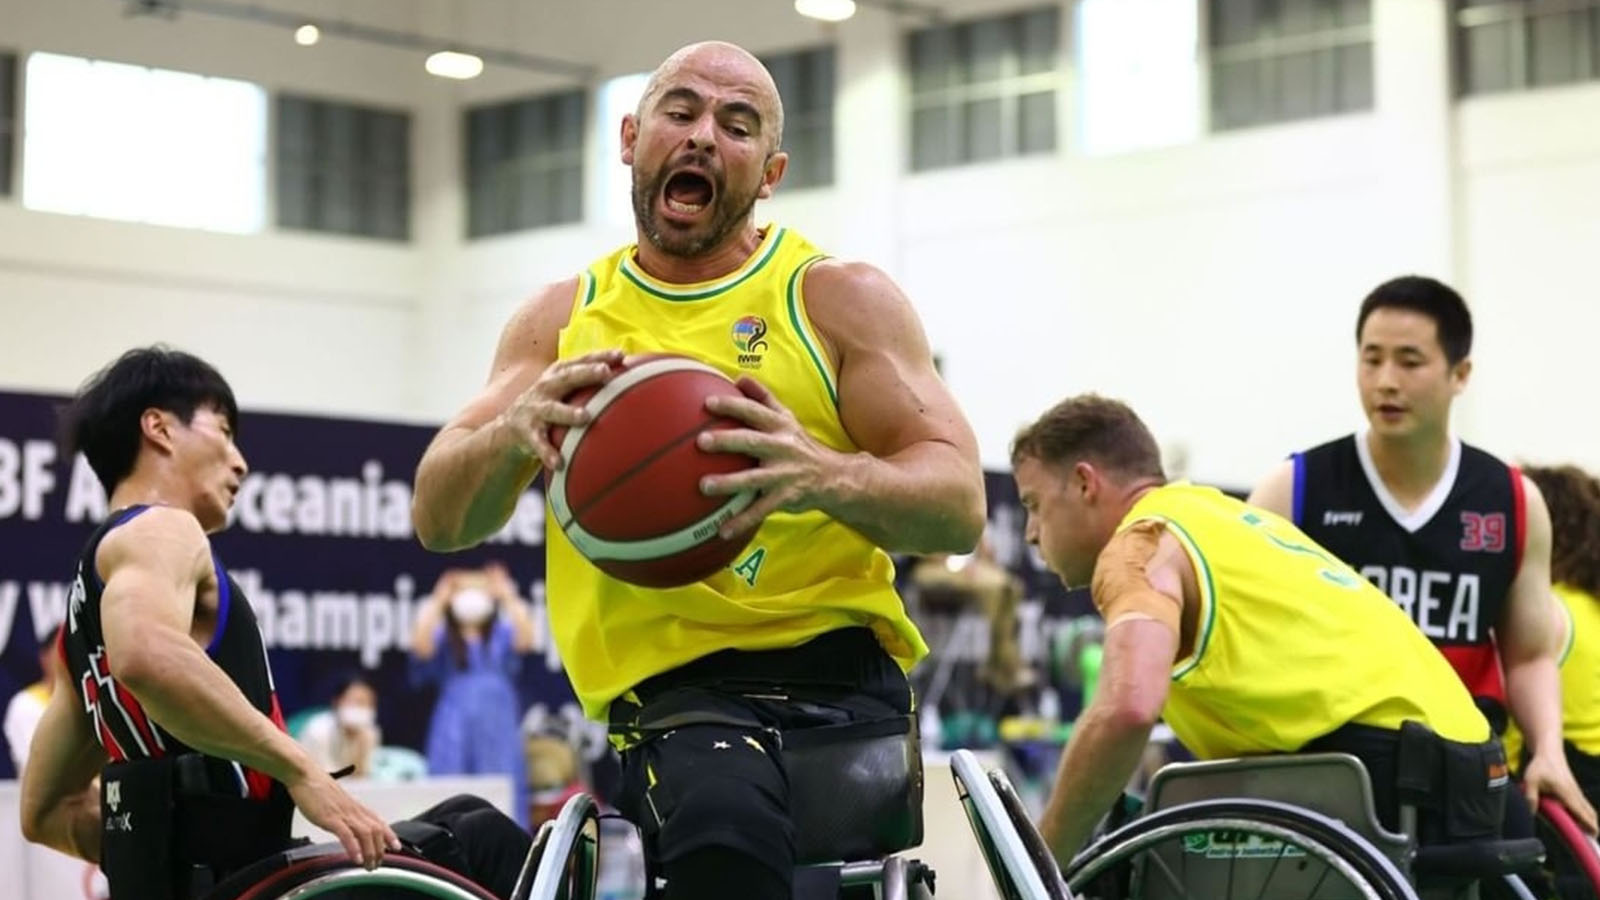 A man is playing wheelchair basketball. He is wearing a yellow and green basketball singlet, holding a basketball in both hands.